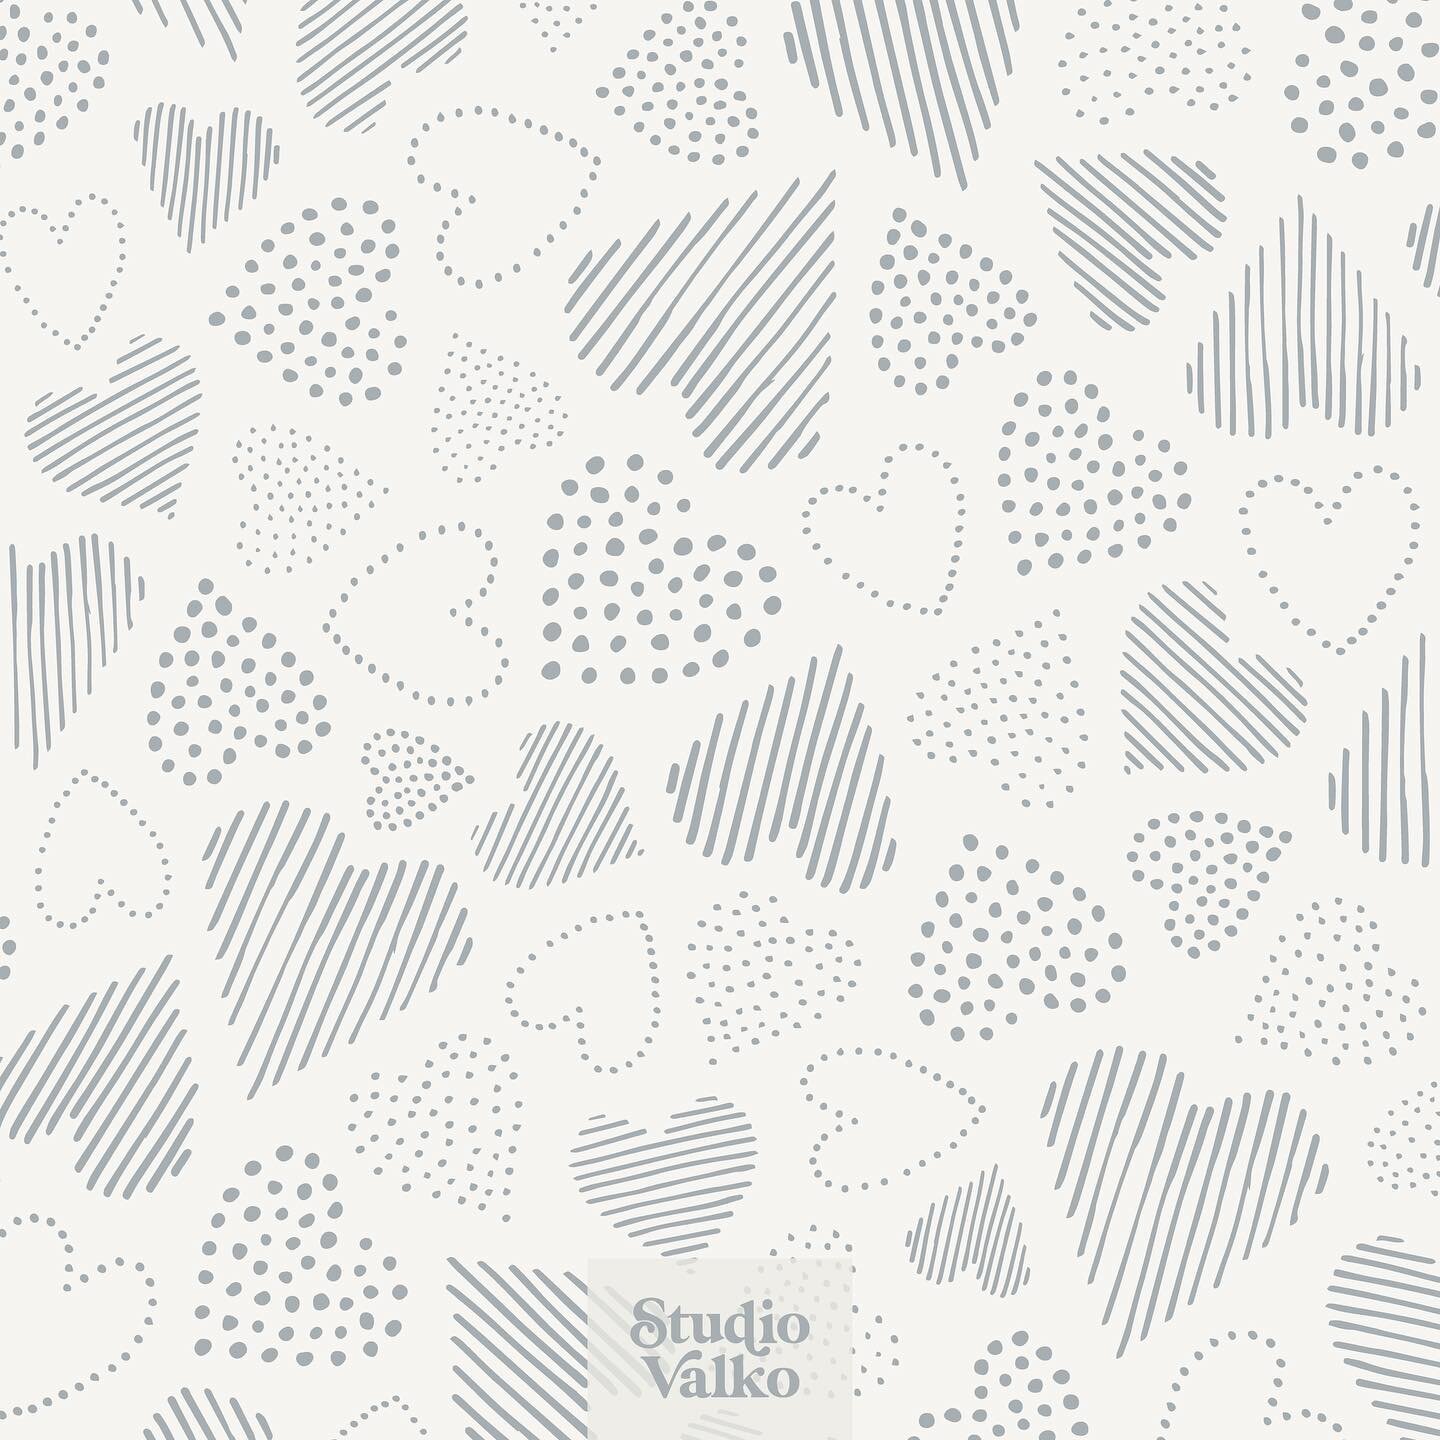 Happy valentine&rsquo;s day! 

This design is available on fabrics, home decor items and wallpaper in my @spoonflower shop. Link in bio and in story to shop this collection!

-

Joyeuse St-valentin!

Ce motif est disponible sur tissus, items de d&eac